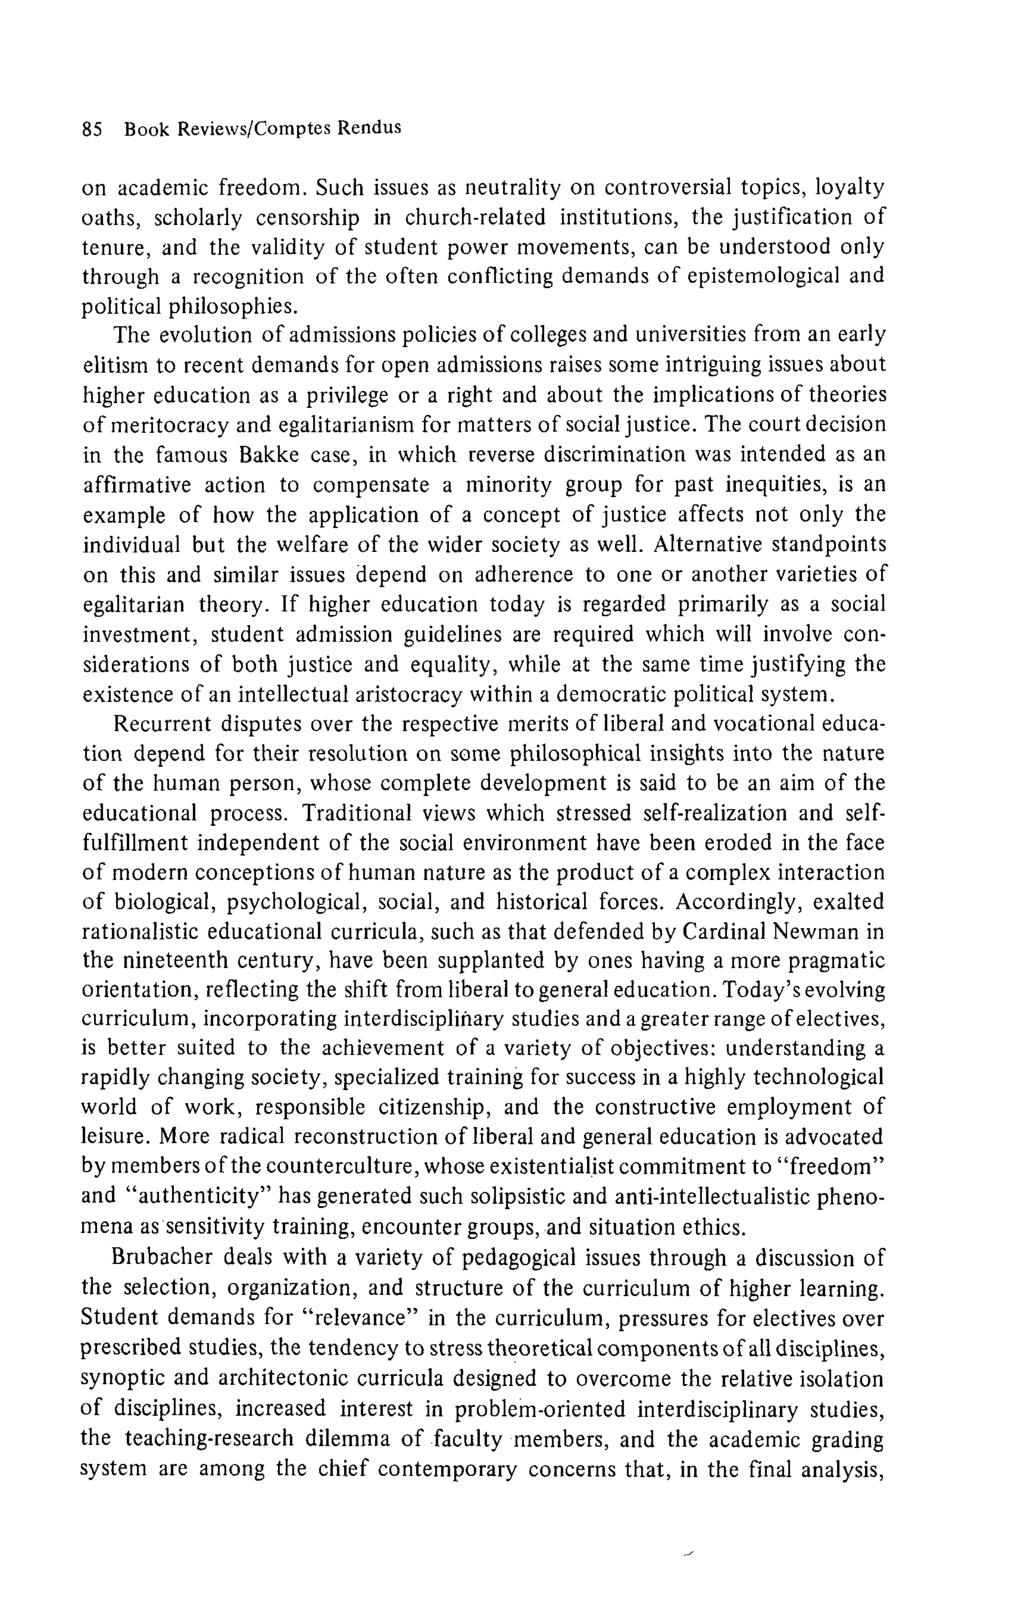 85 Book Reviews/Comptes Rendus on academic freedom.